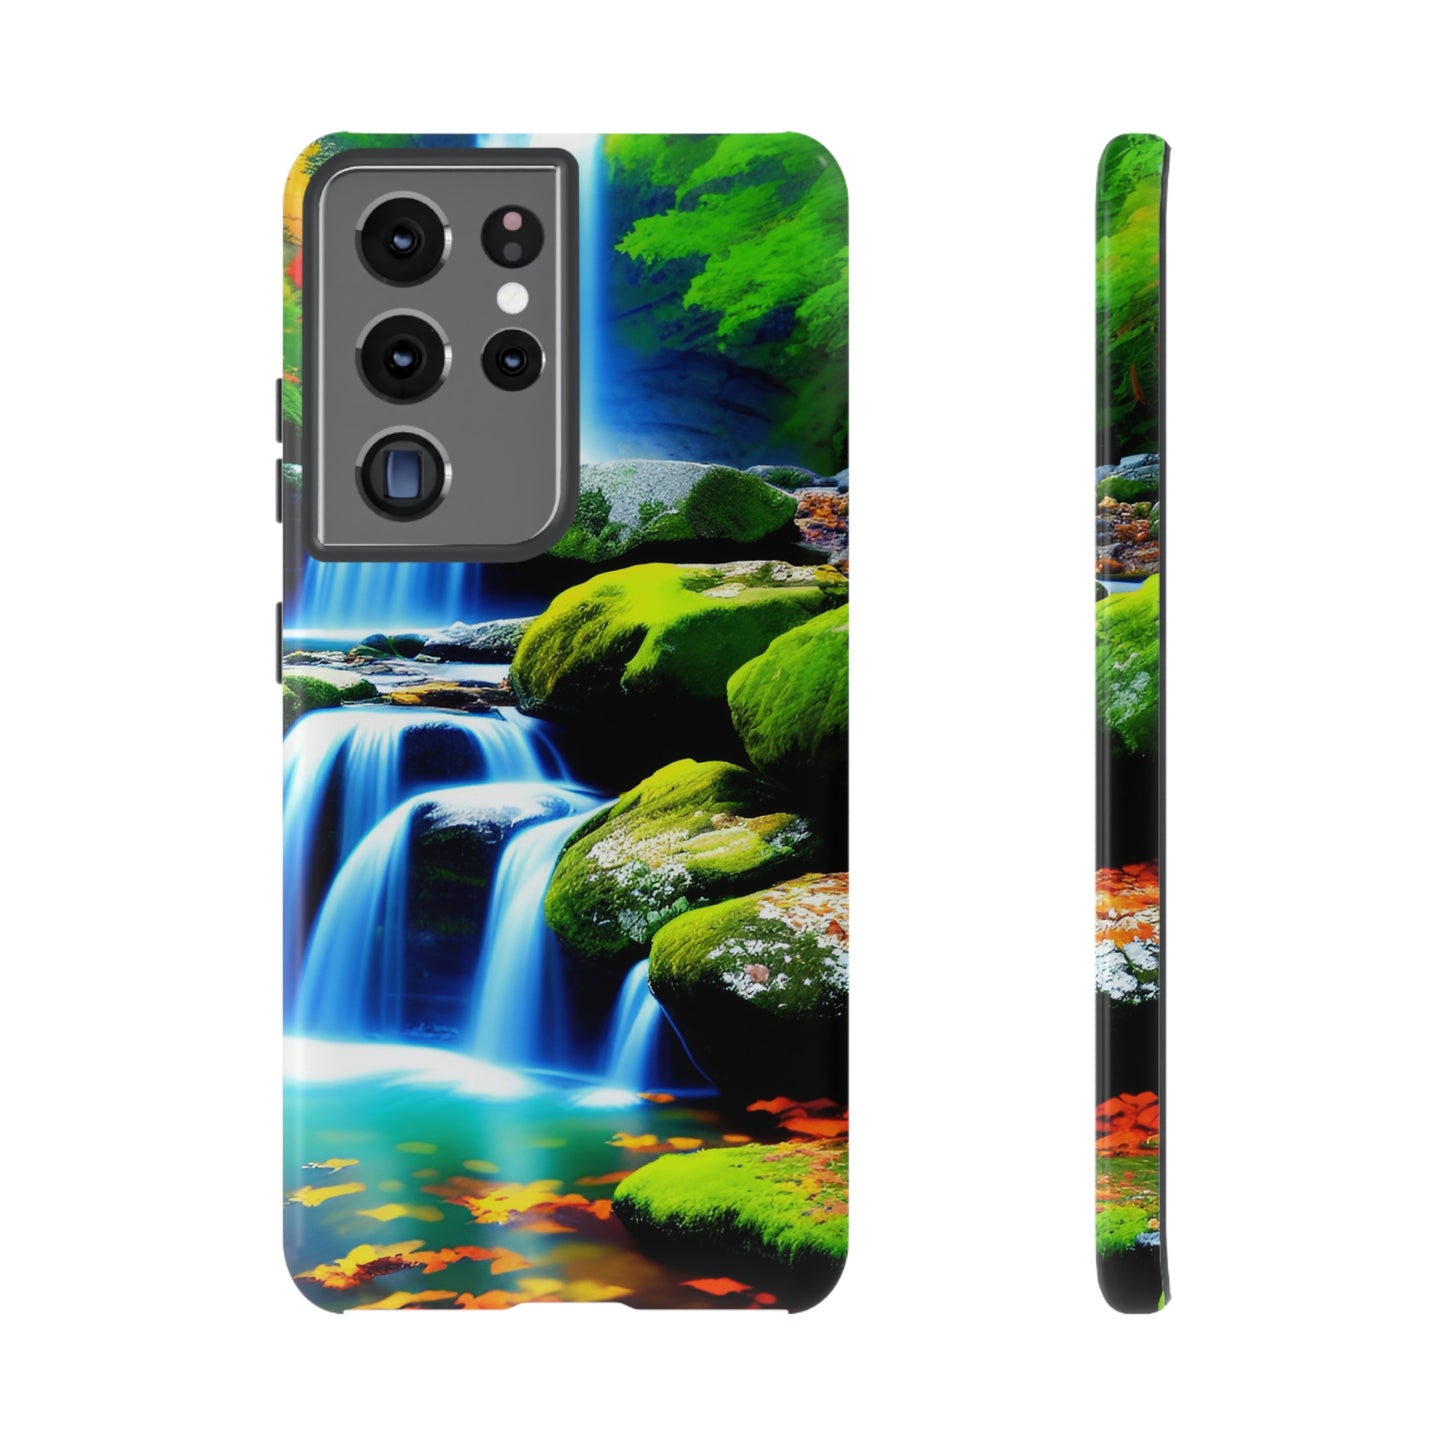 Jungle Waterfall Tough Cases